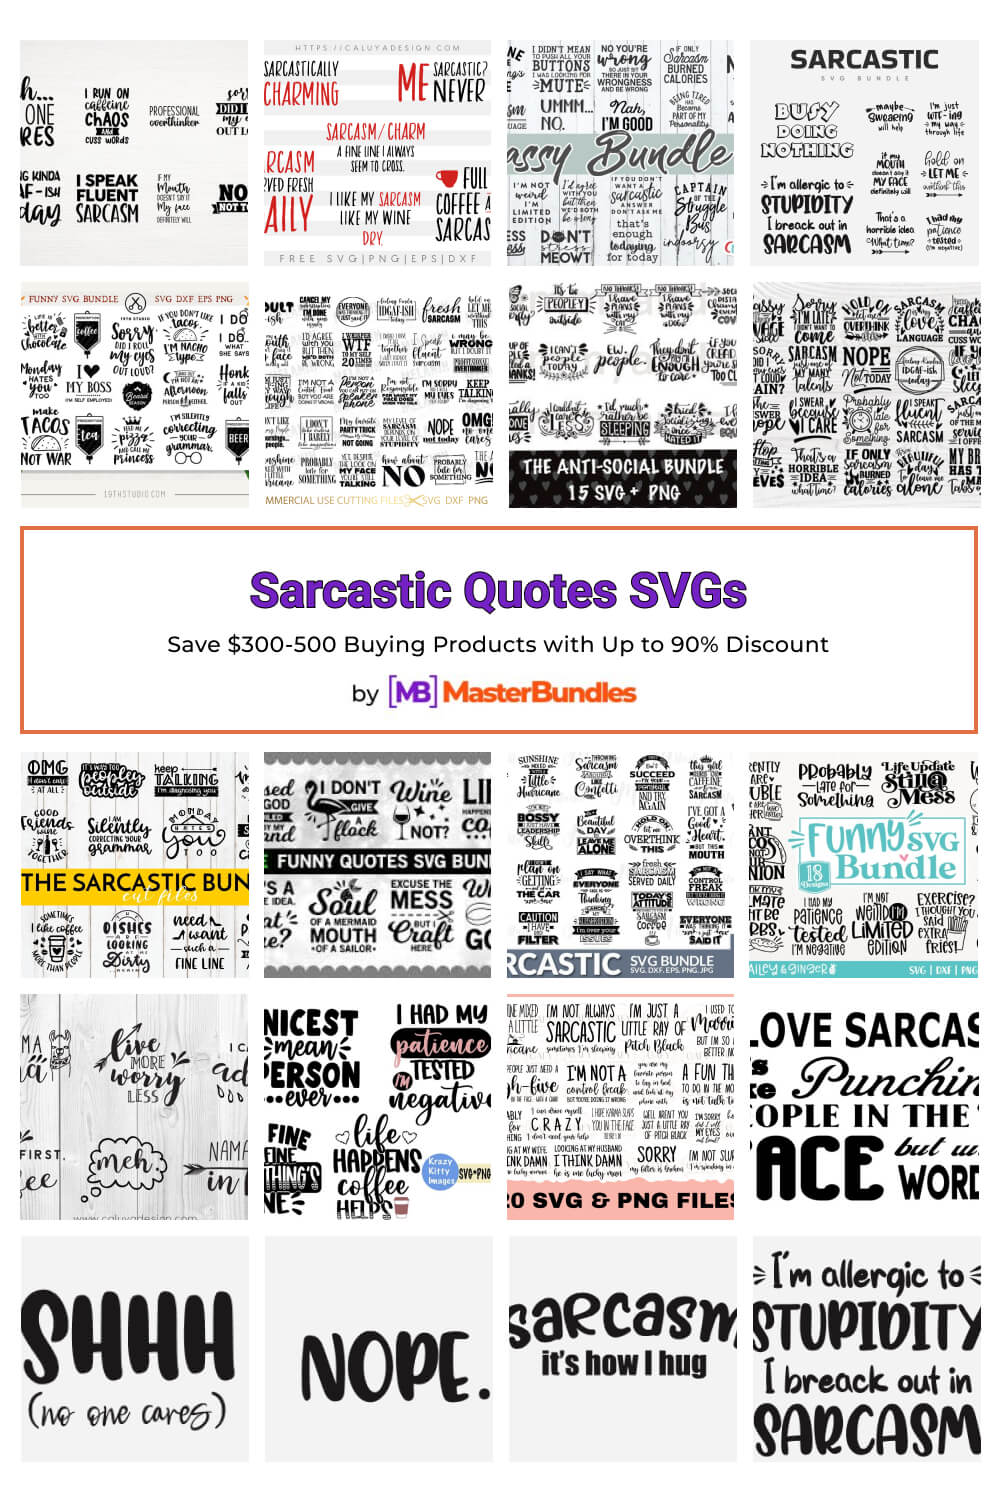 sarcastic quotes svgs pinterest image.